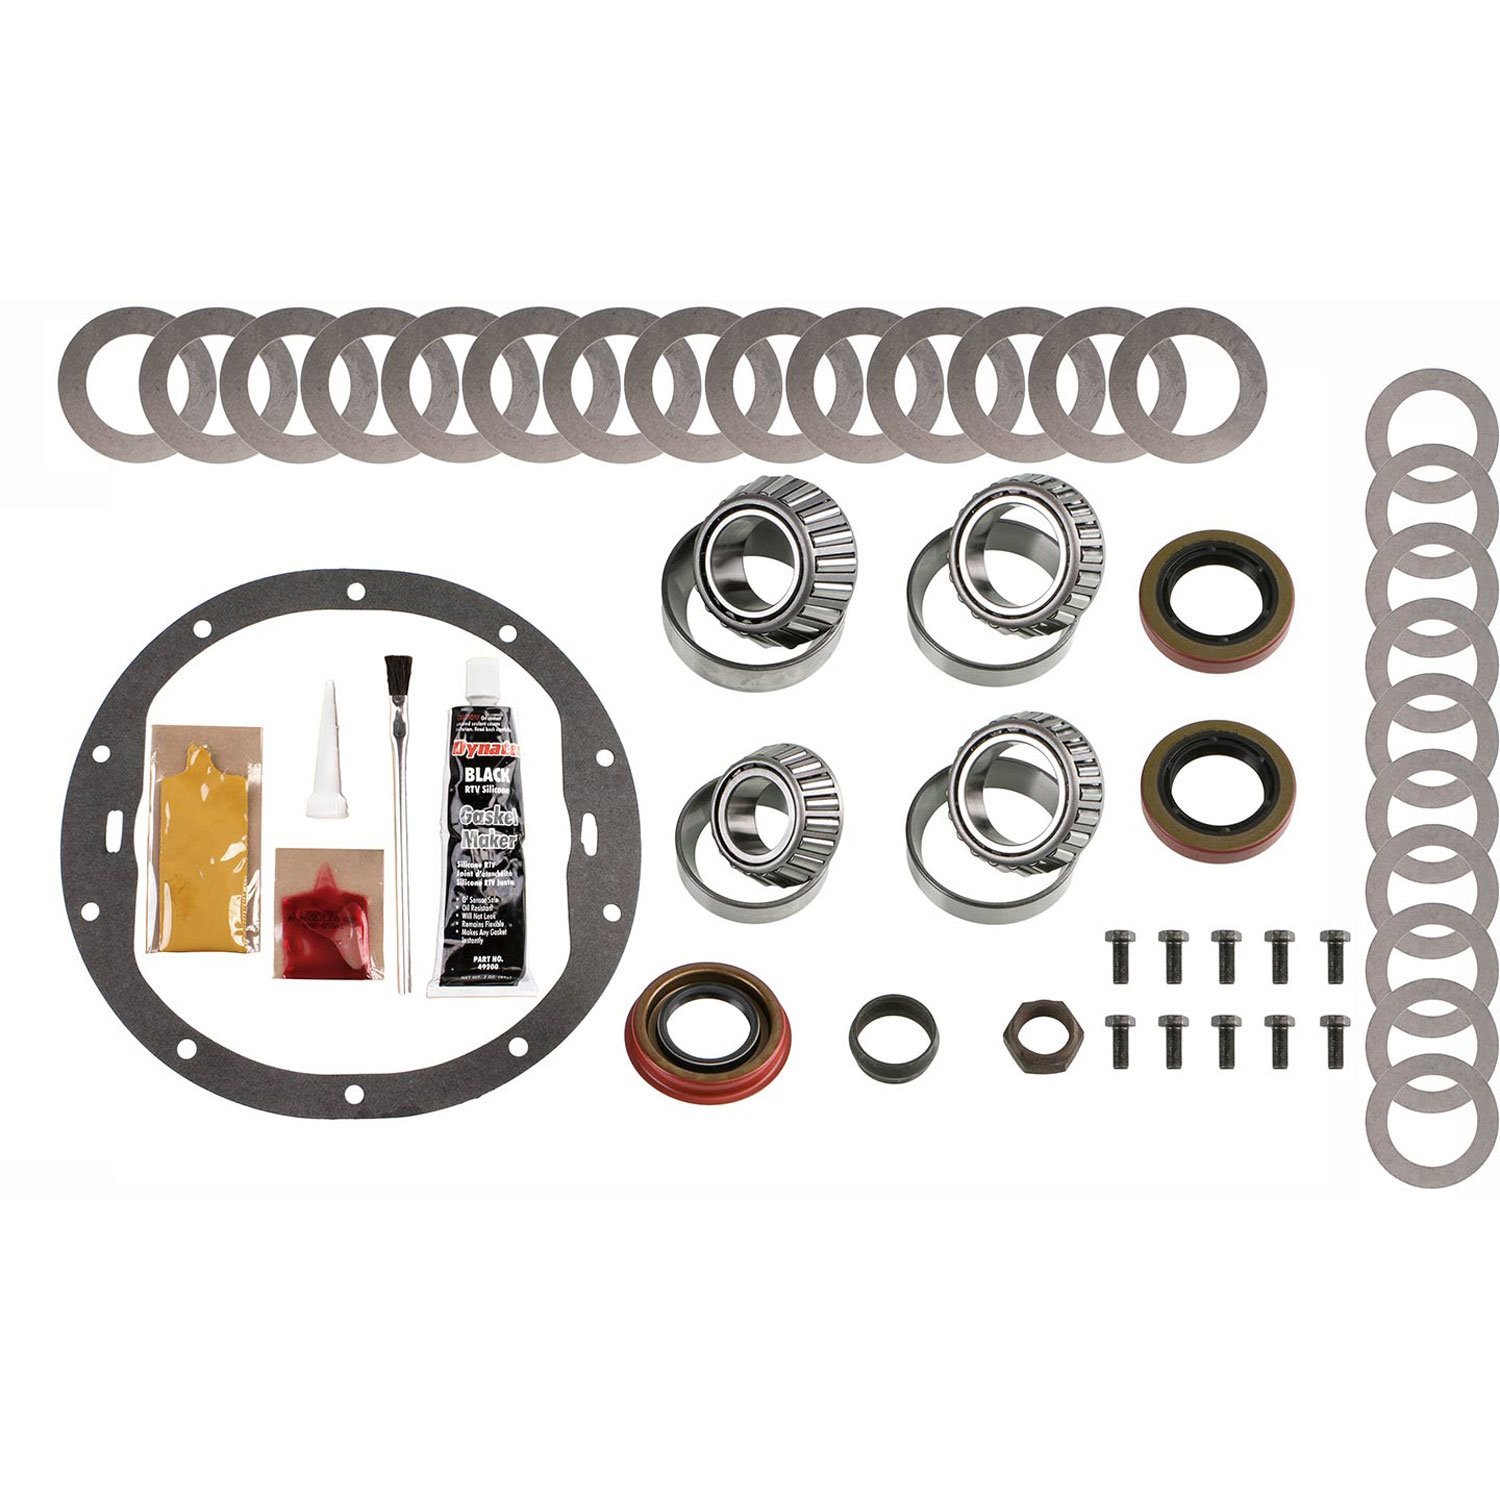 Differential Super Bearing Kit GM 8.2 in. 10-bolt